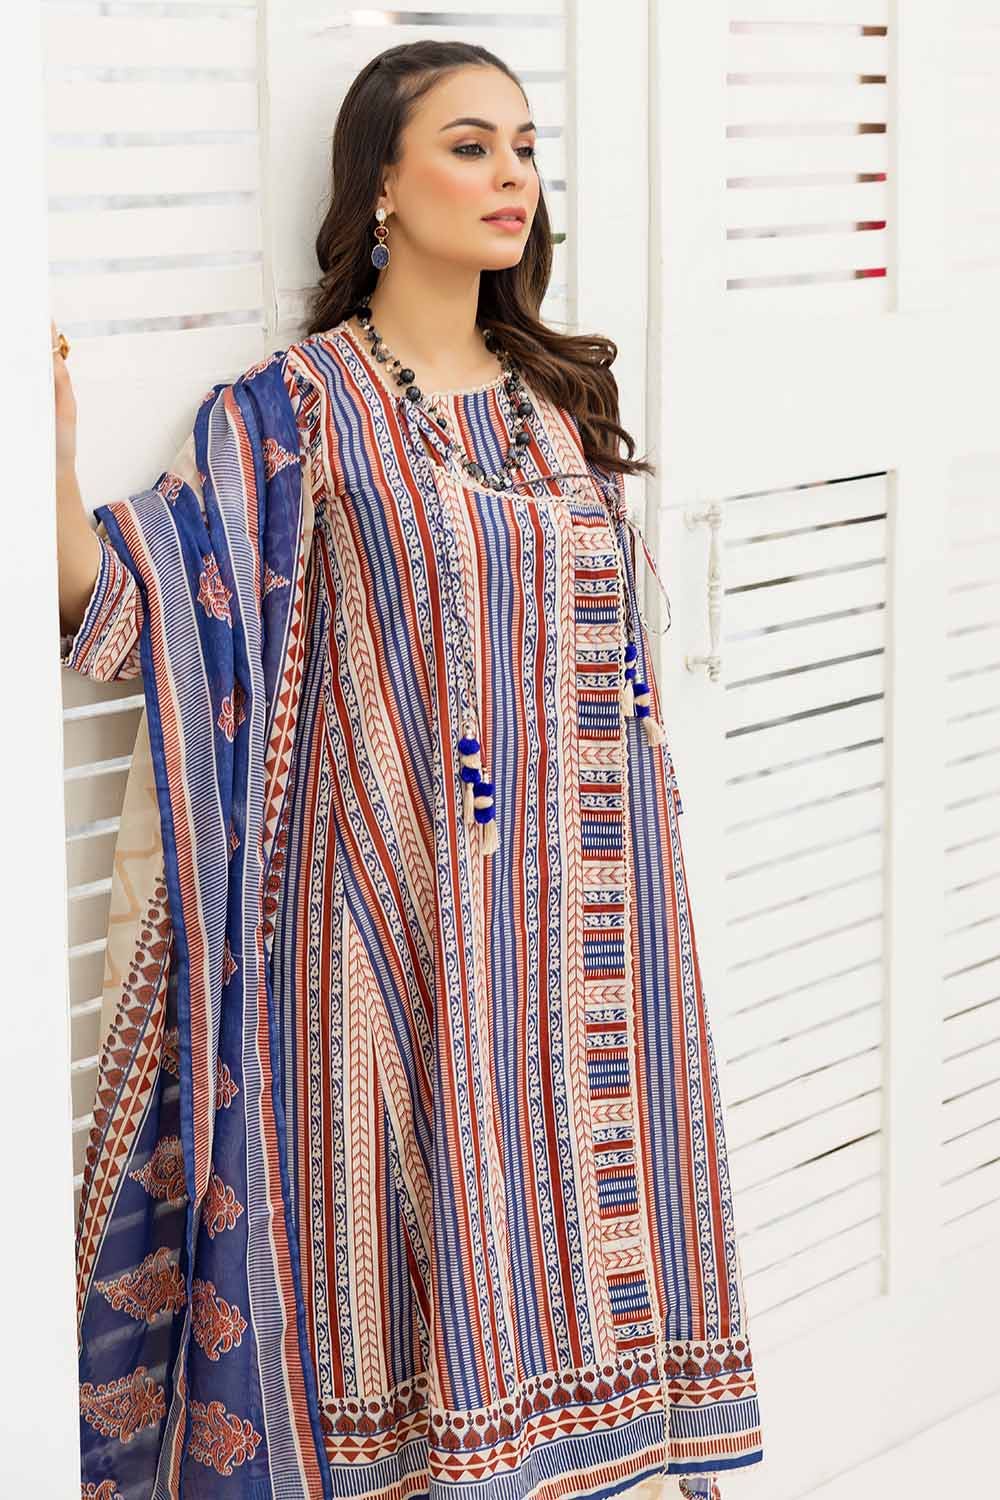 Gul Ahmed 3PC Printed Lawn Unstitched Suit CL-32585 B